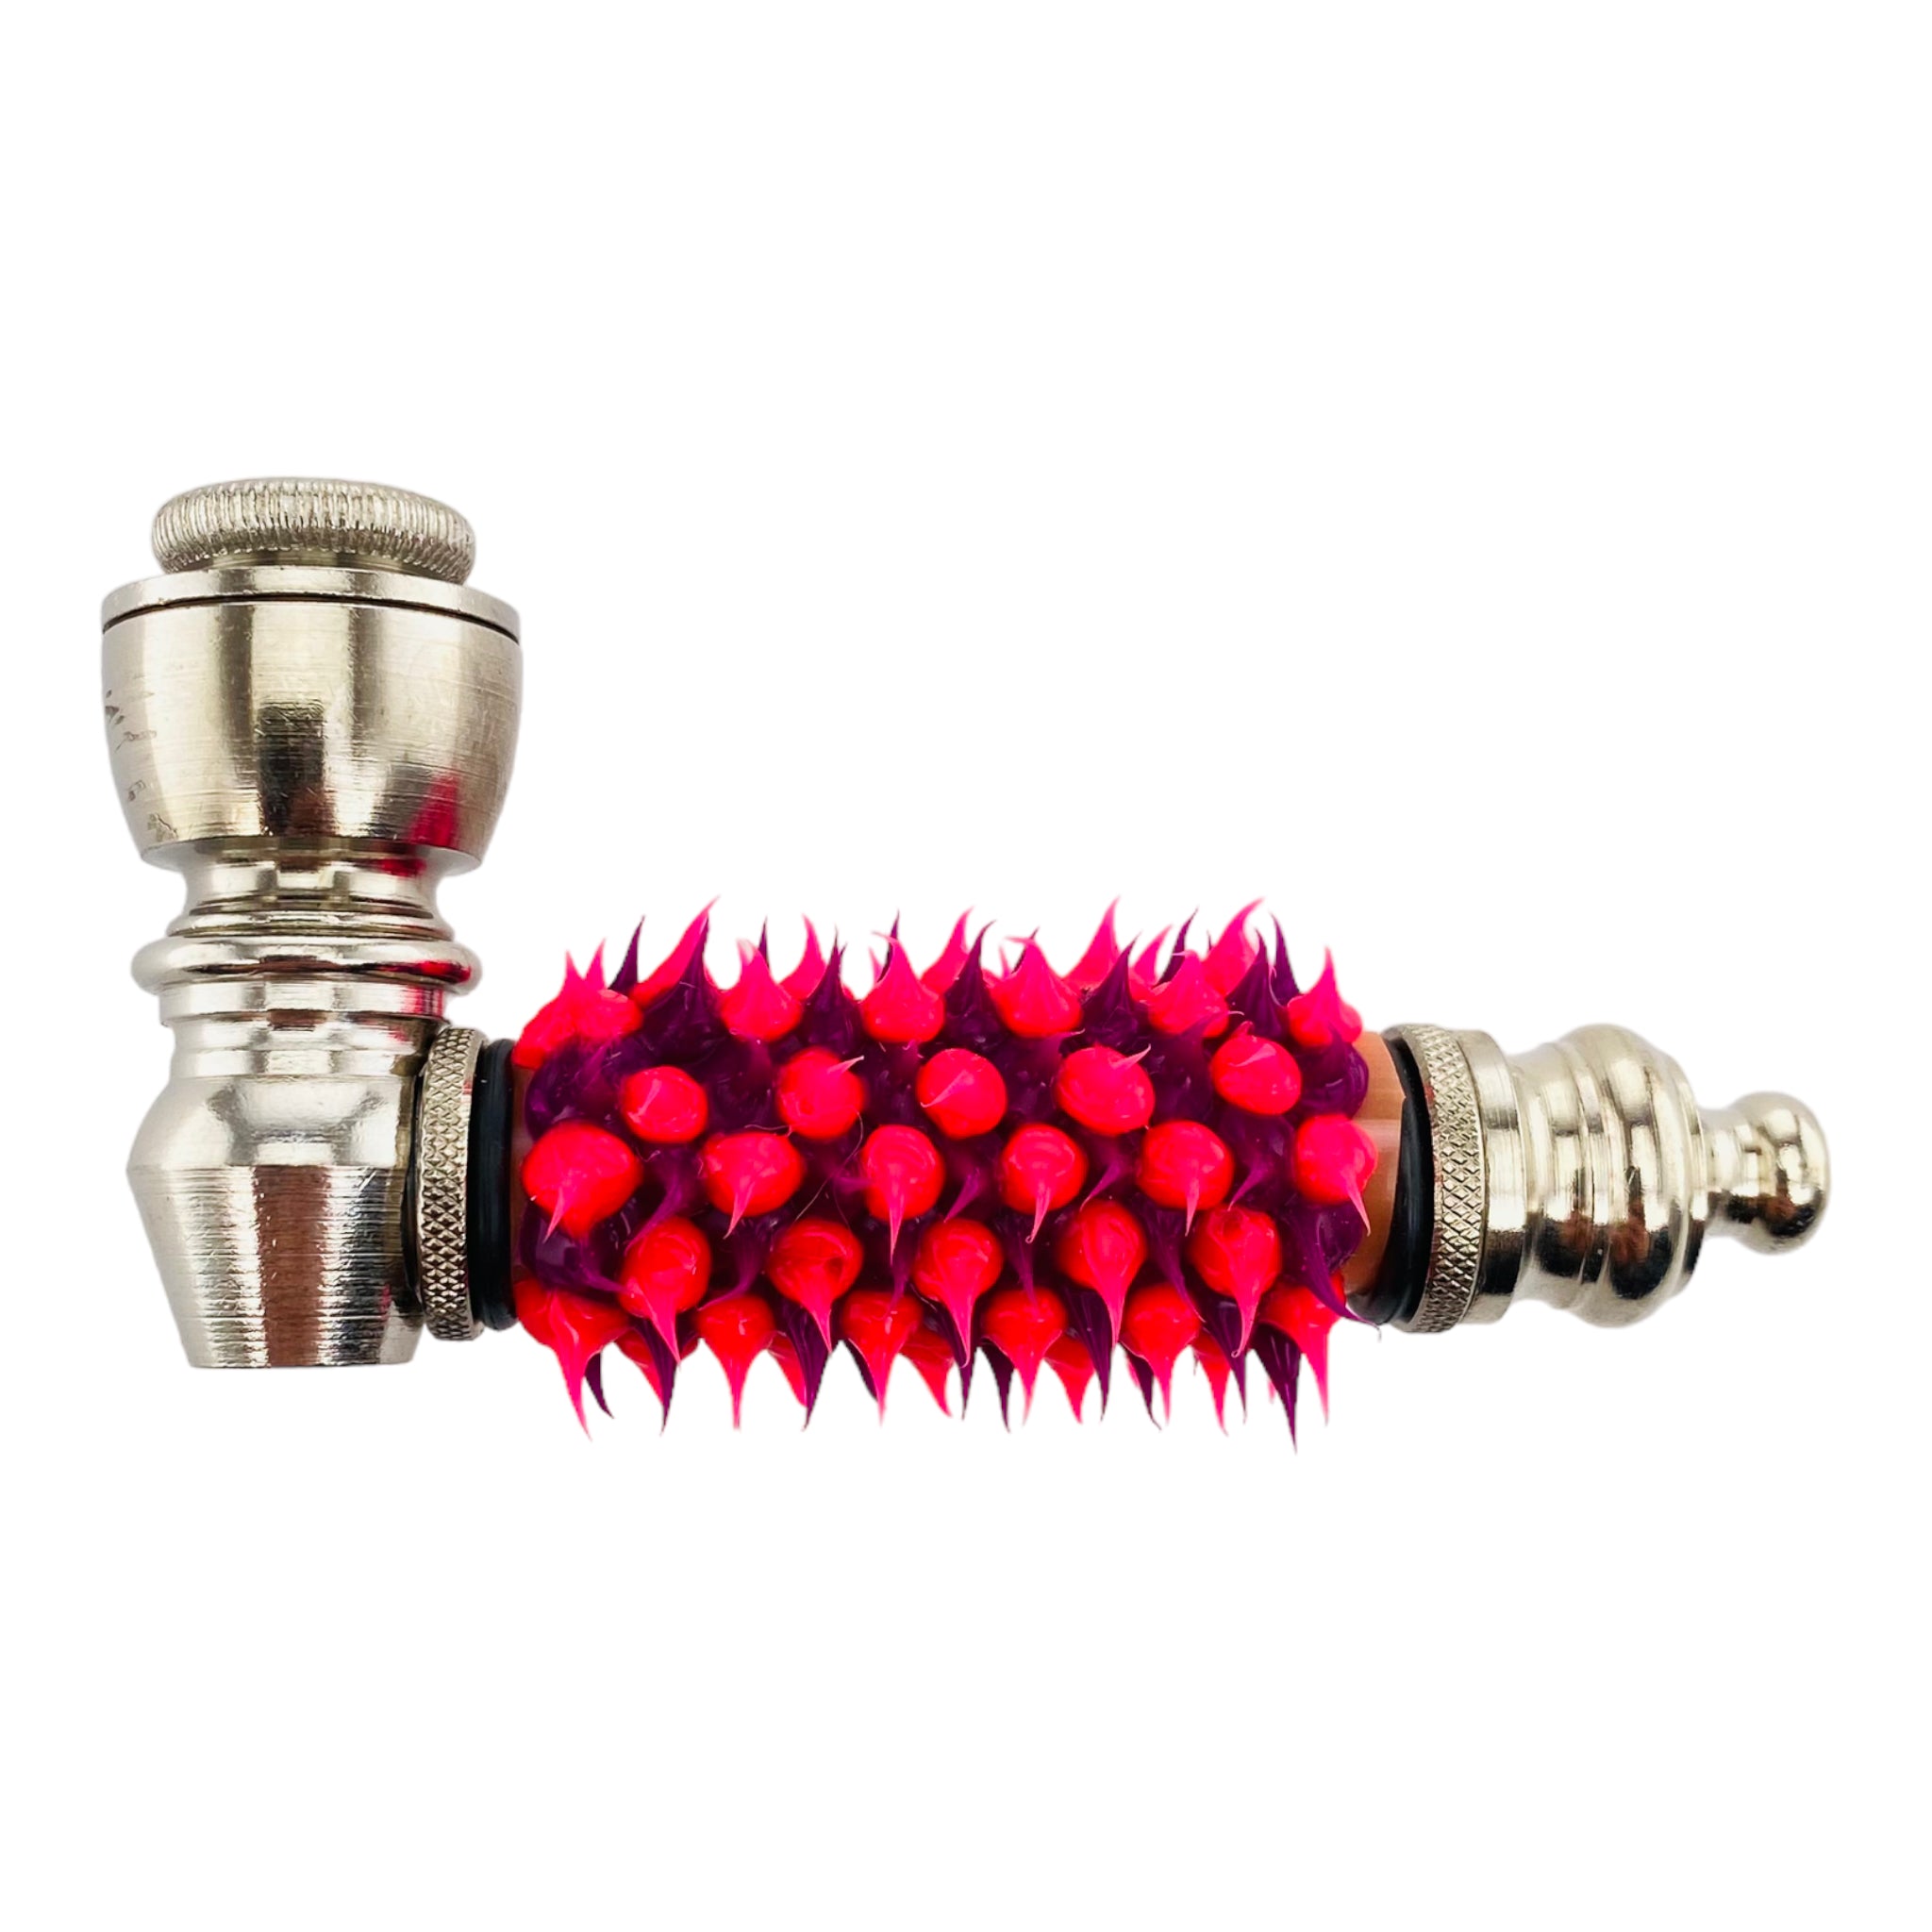 Metal Hand Pipes - Silver Chrome Hand Pipe With Skull With Pink Silicone Spikes